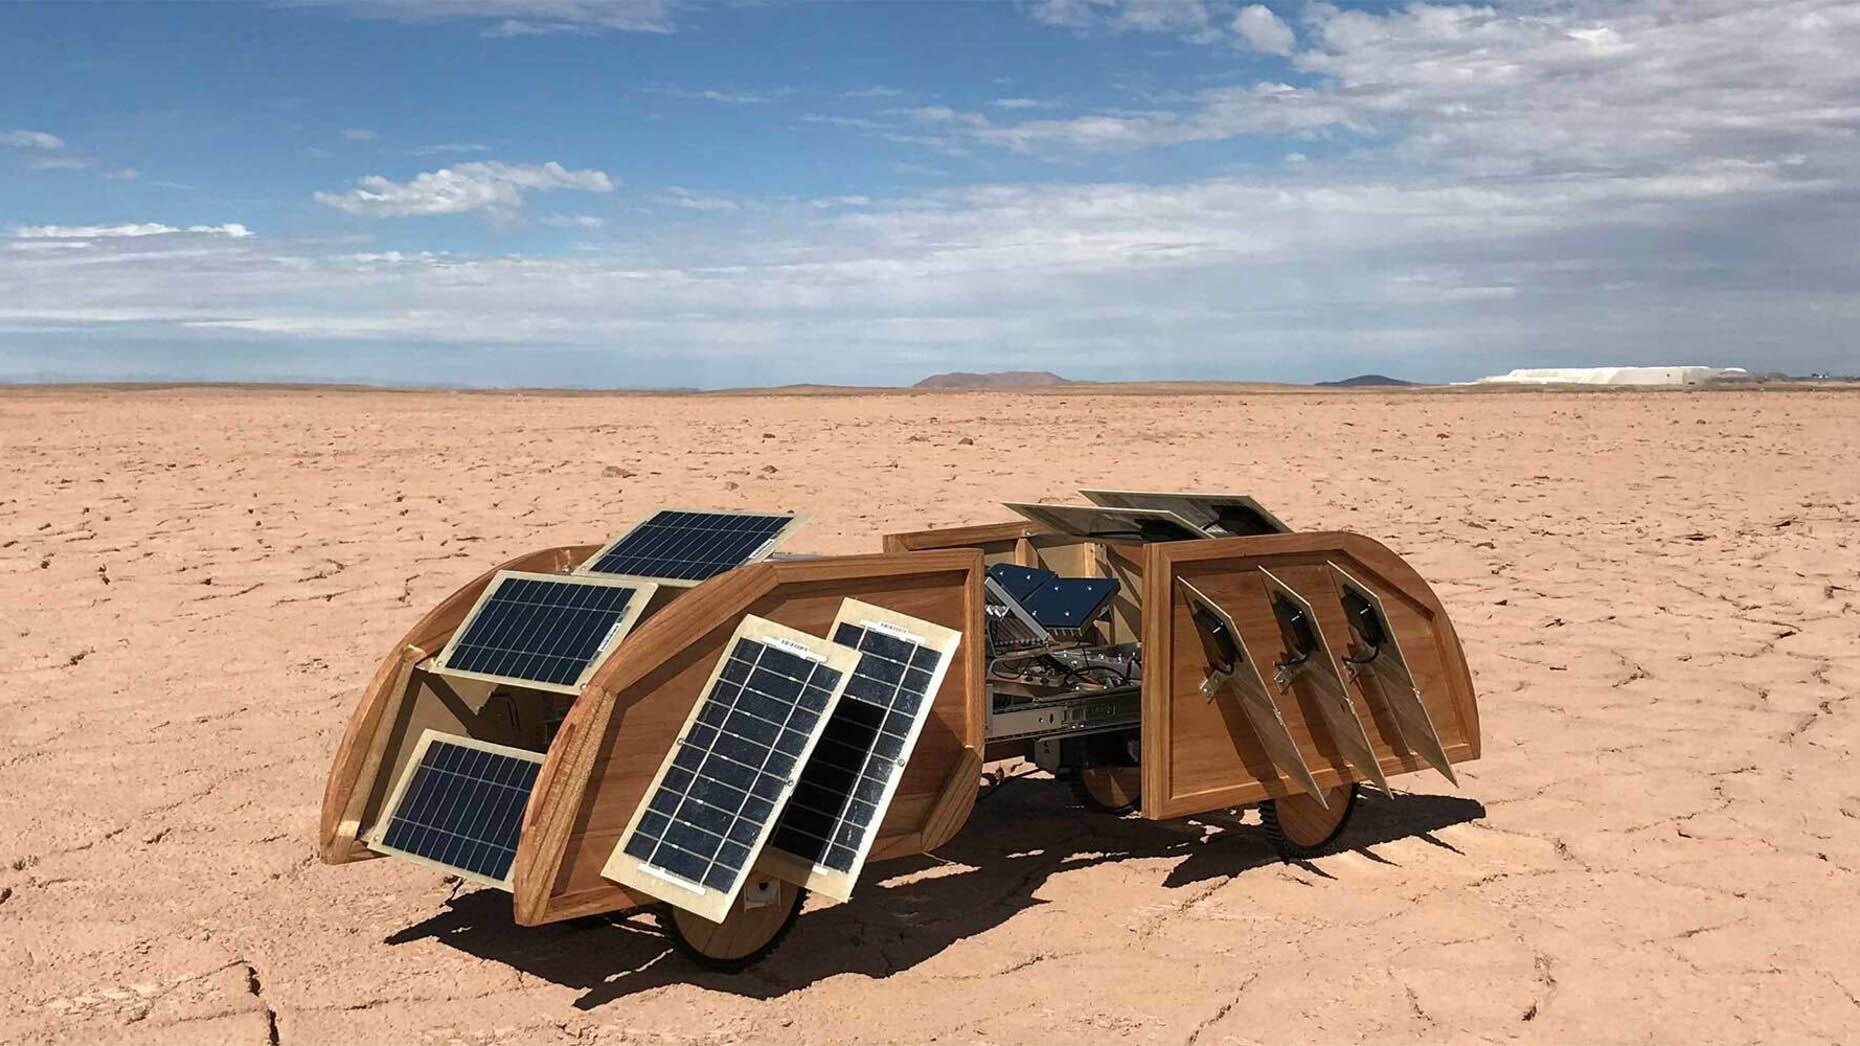 A robot with wooden sides, solar panels and wheels in a desert environment